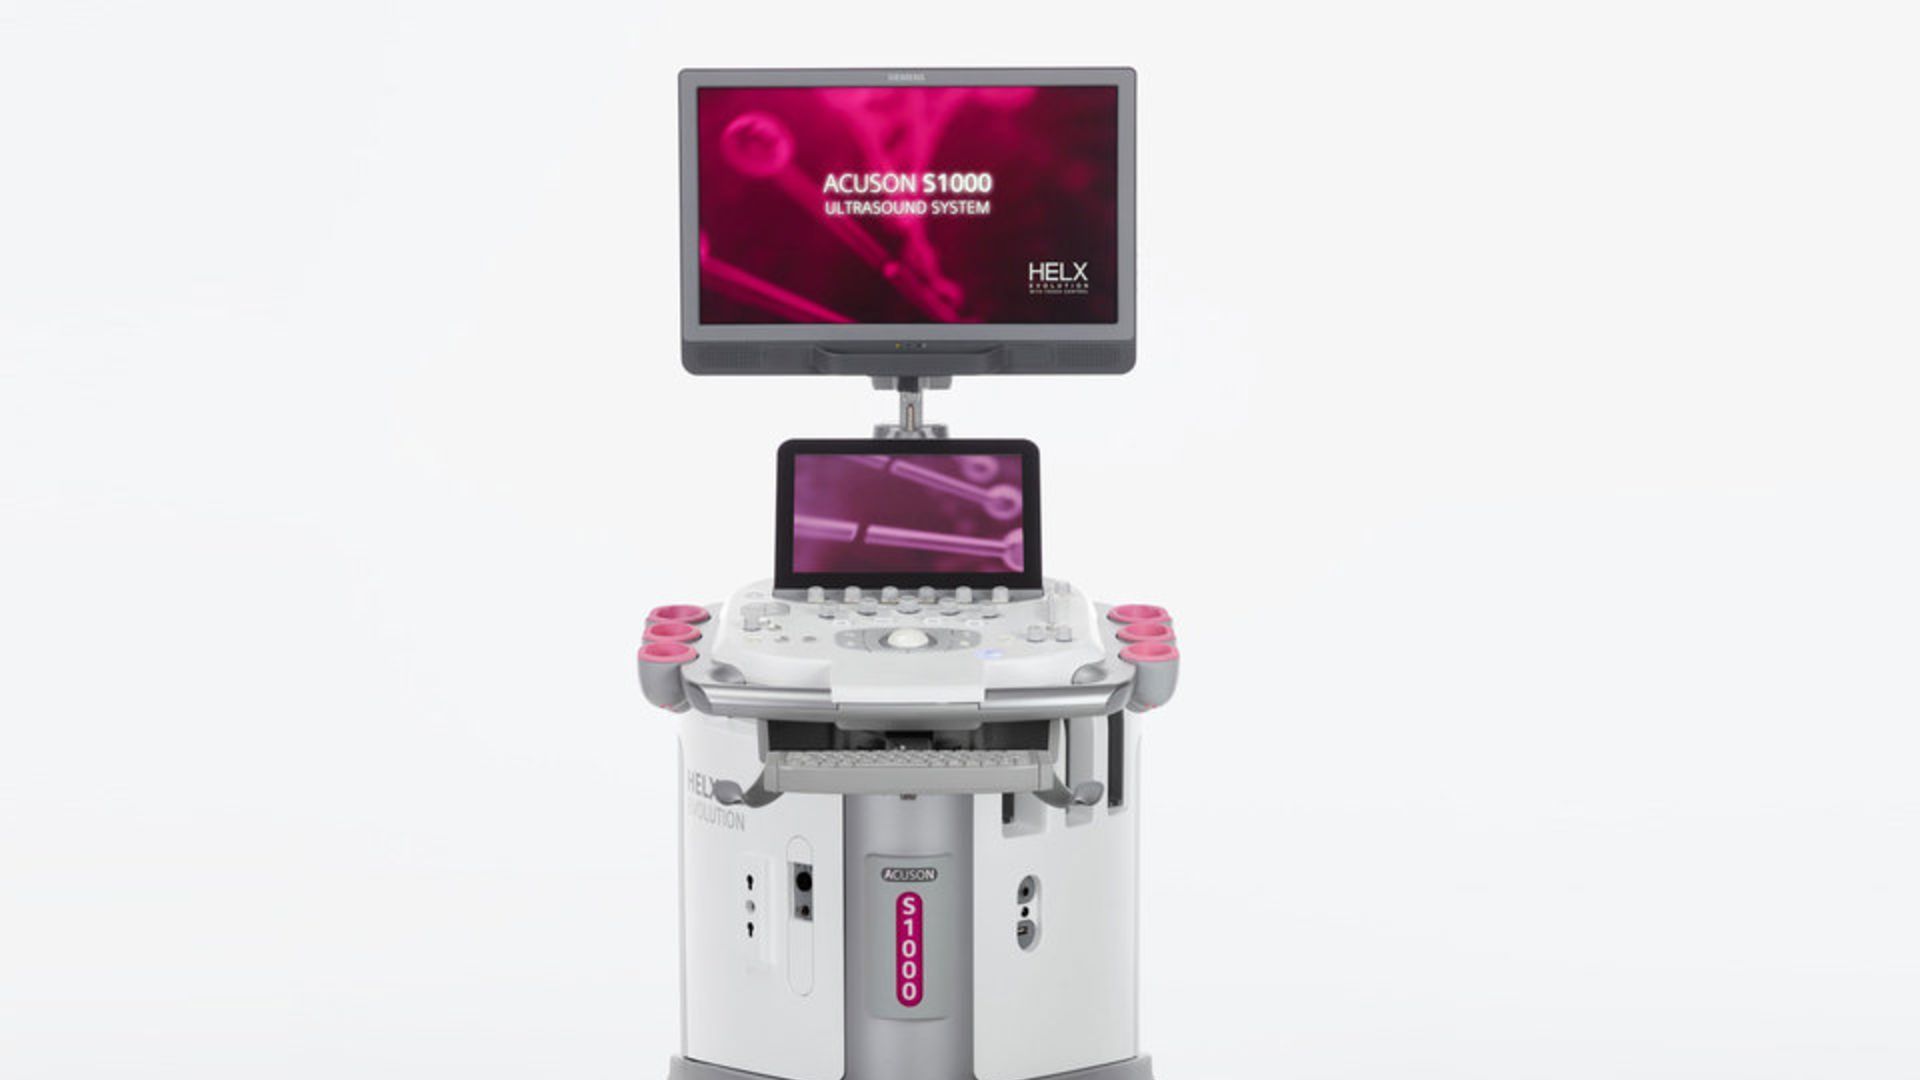 acuson_s1000_ultrasound_system_helx_evolution_with_touch_control_teaser-02422912_10-06551684_8